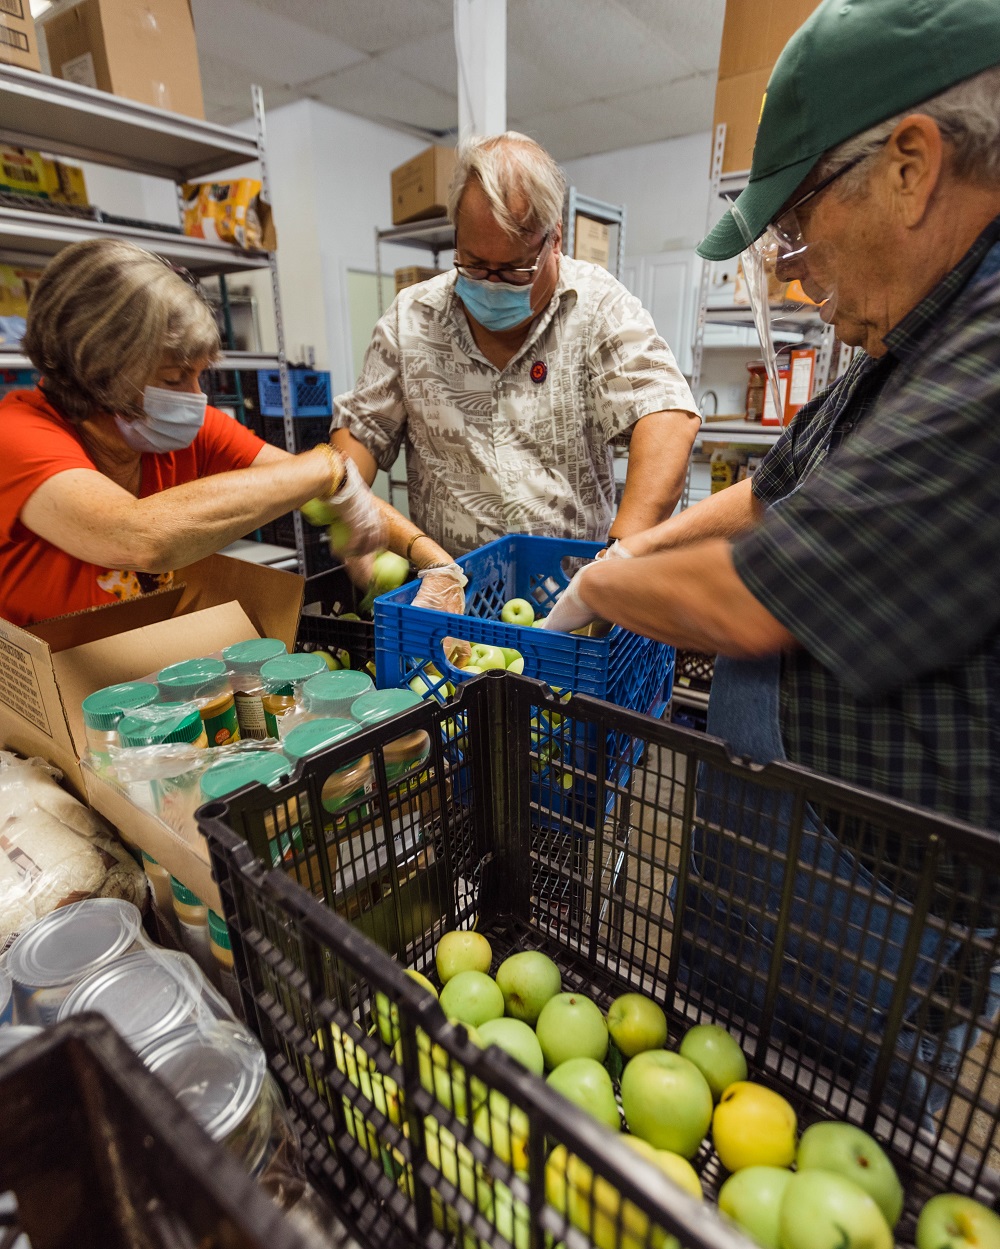 Two men and one women are sorting apples and peanut butter into bins and boxes.